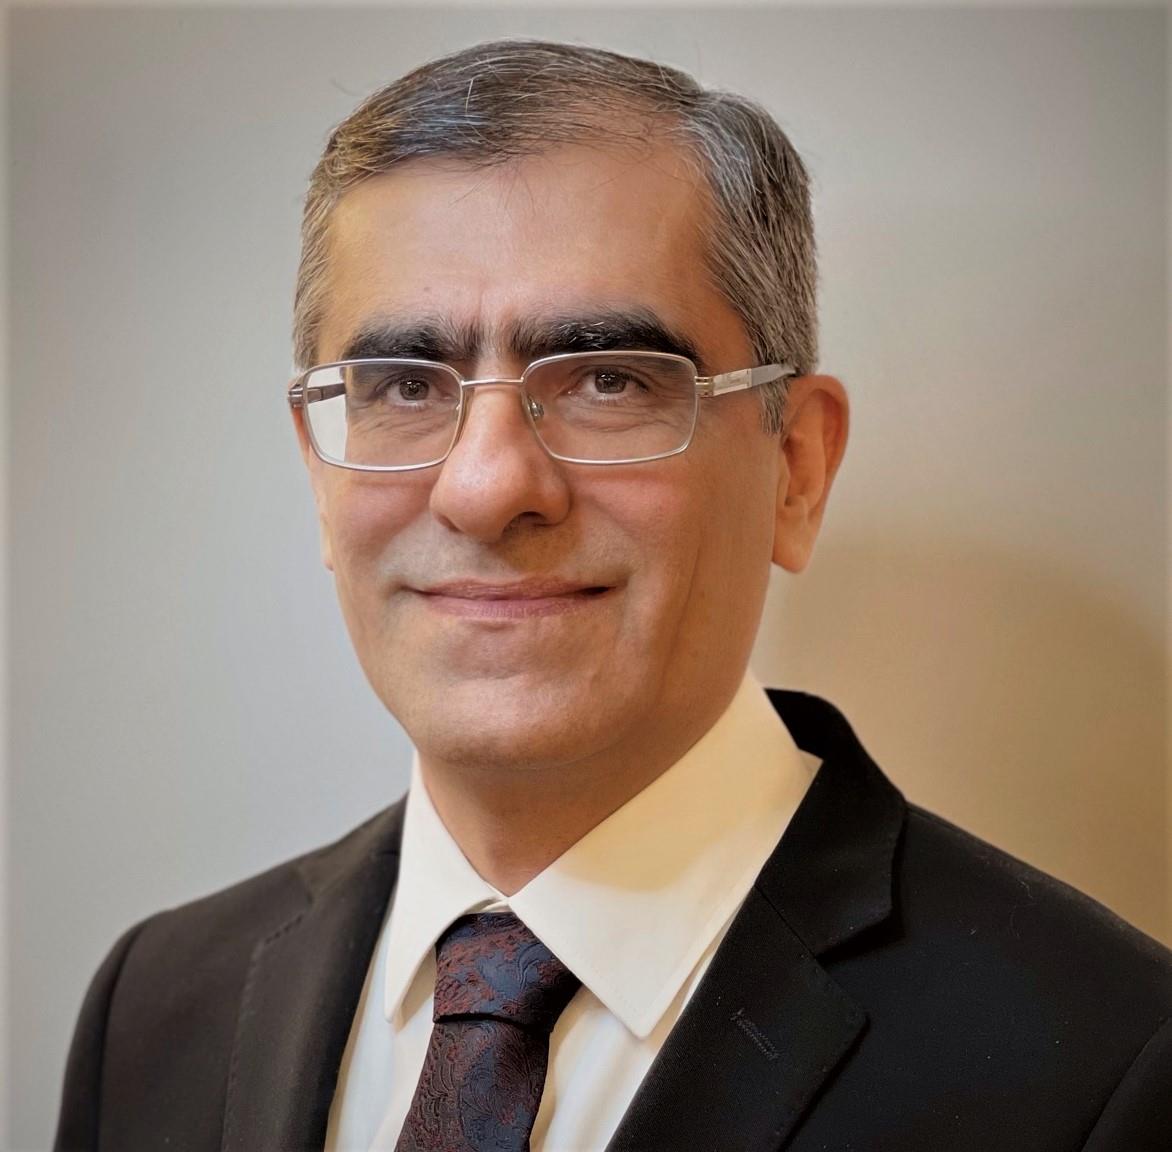 The avatar image for Dr Amir Soltani